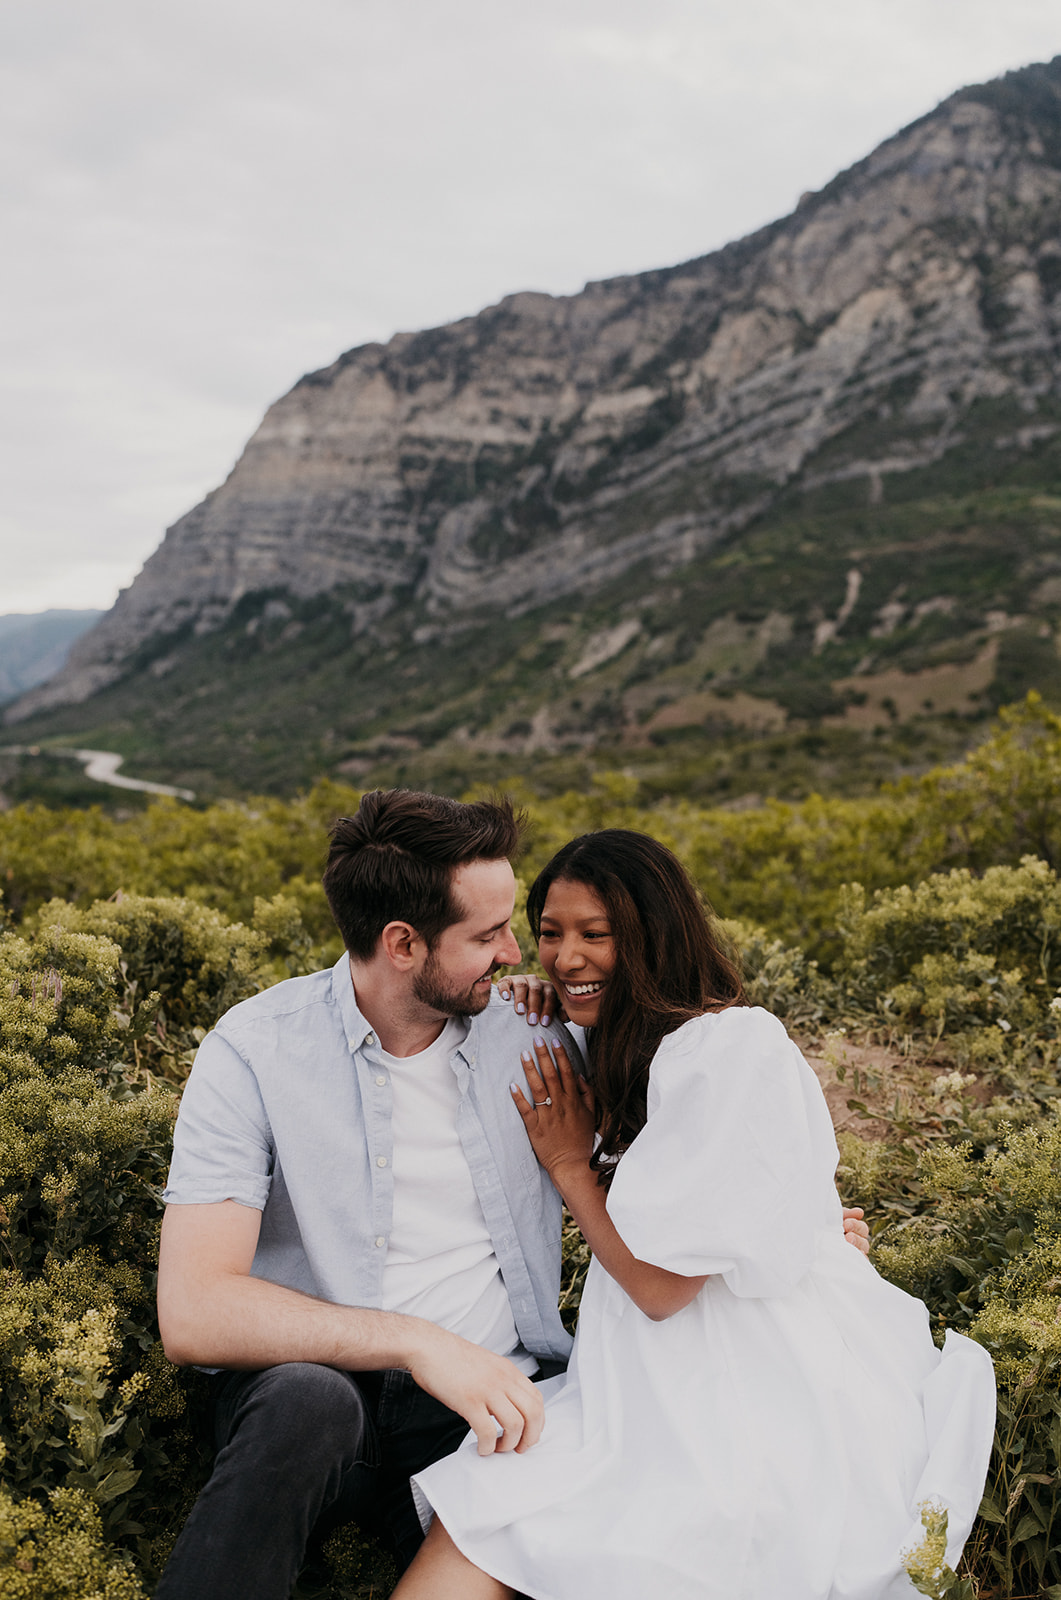 A couple sit and laugh together in a mountain trail in a white dress and blue shirt Donovan Pavilion wedding